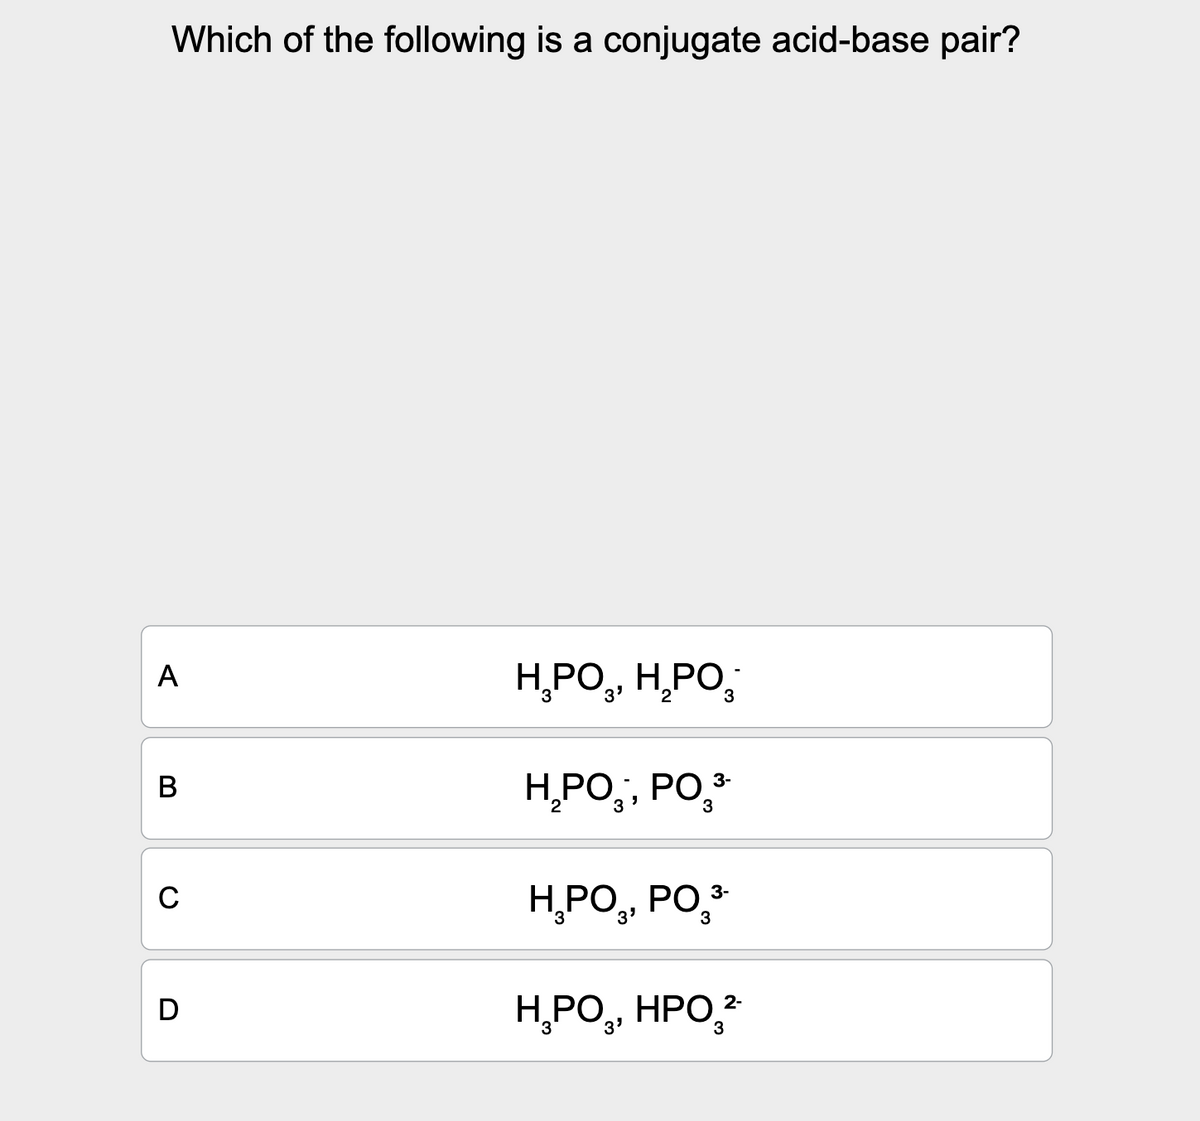 A
B
C
Which of the following is a conjugate acid-base pair?
H₂PO₂, H₂PO
H₂PO₂, PO3-
3
3-
HPO₂, PO³
3
D
H₁PO₂, HPO 2
3